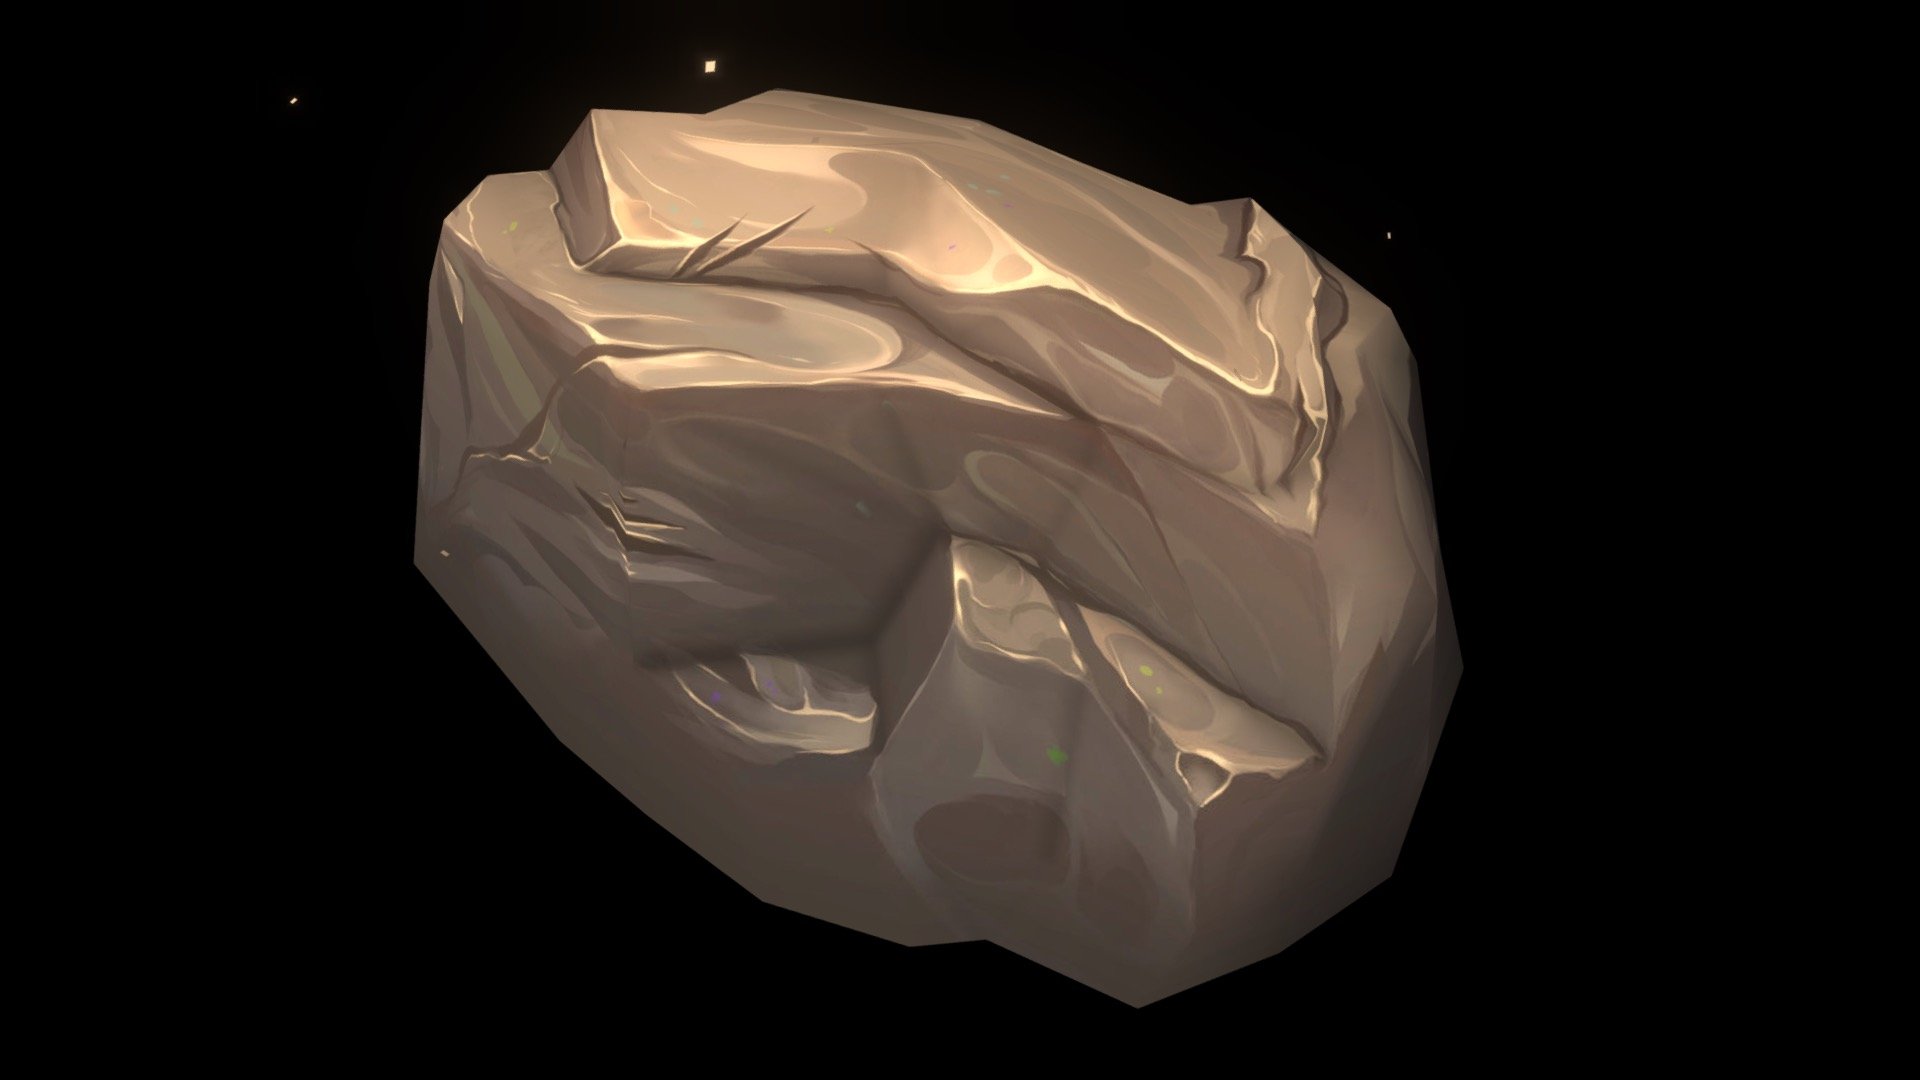 This is a rock I created in my free time, 

I spend a very long time texturing on this rock this time, usually I rush that part even though Im way better at the texturing than modelling. 💀

Im going for that league of legends painterly style with this one hope you like it 🤓

Modelled in Maya and Textured in substance painter 3d model